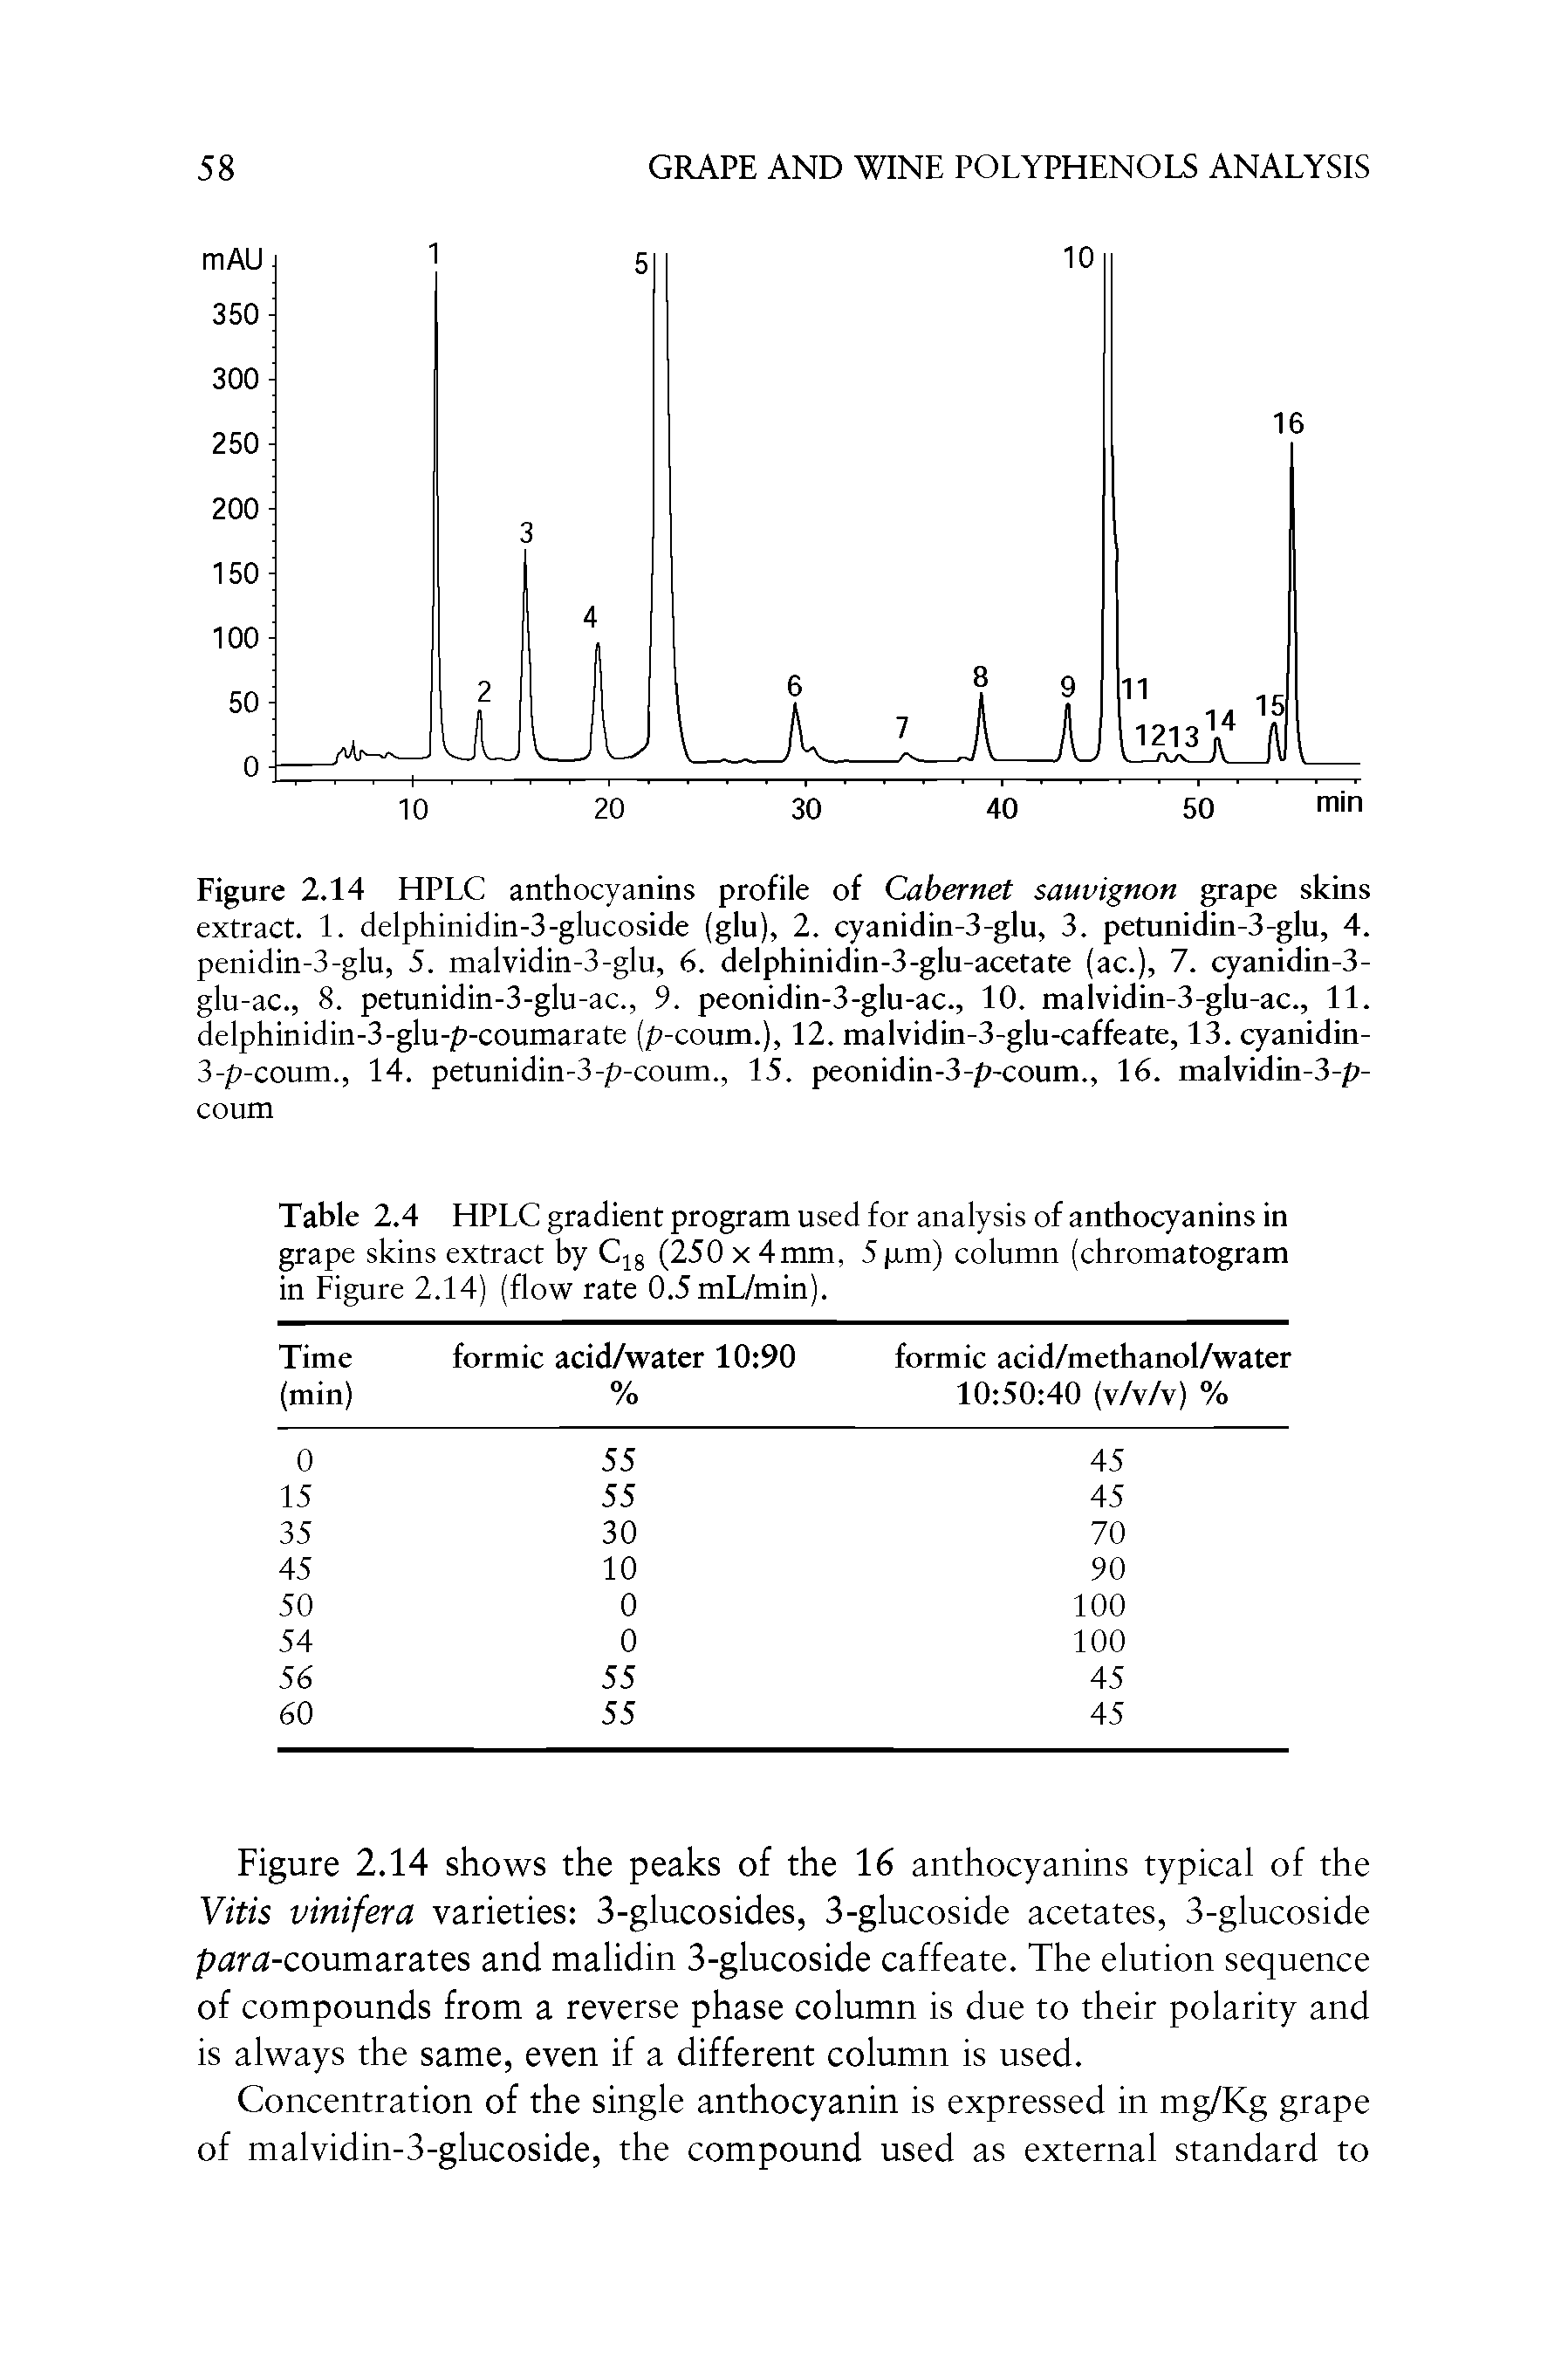 Table 2.4 HPLC gradient program used for analysis of anthocyanins in grape skins extract by C18 (250 x 4mm, 5 pm) column (chromatogram in Figure 2.14) (flow rate 0.5mL/min).